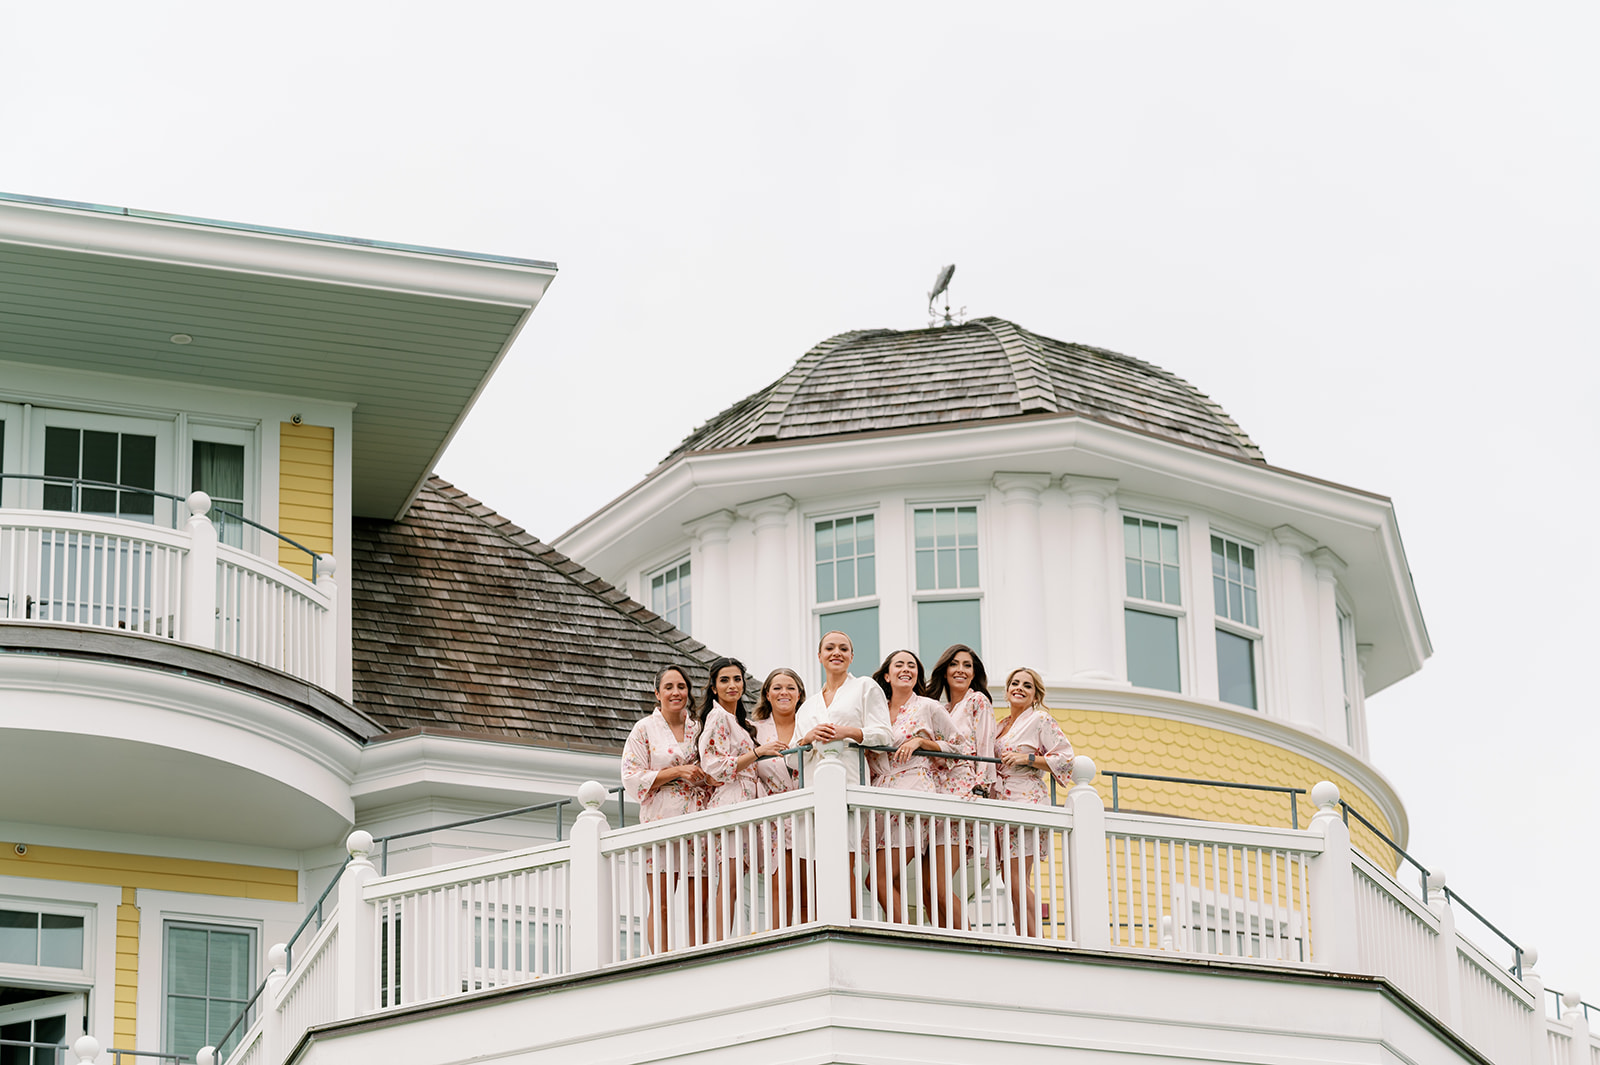 Getting ready portraits of the bride and bridesmaids standing on a large white balcony outside Ocean House in Rhode Island.